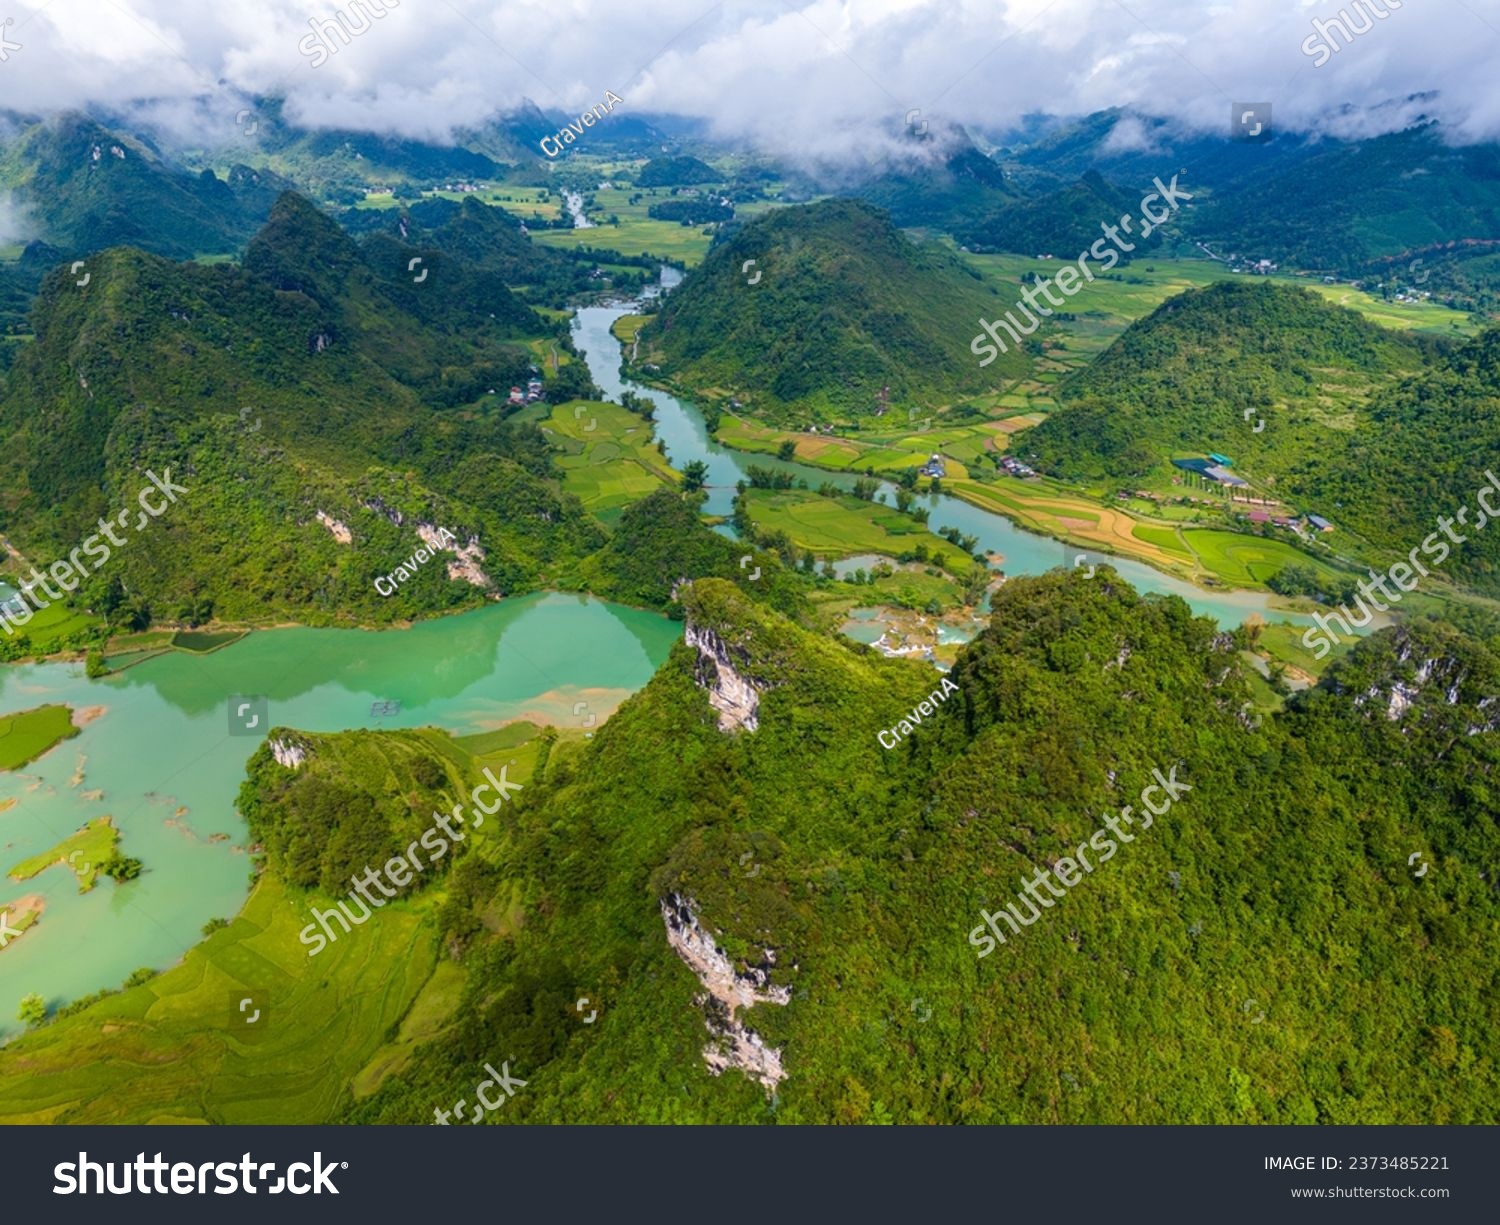 Aerial landscape in Quay Son river, Trung Khanh, Cao Bang, Vietnam with nature, green rice fields and rustic indigenous houses. Travel and landscape concept. #2373485221